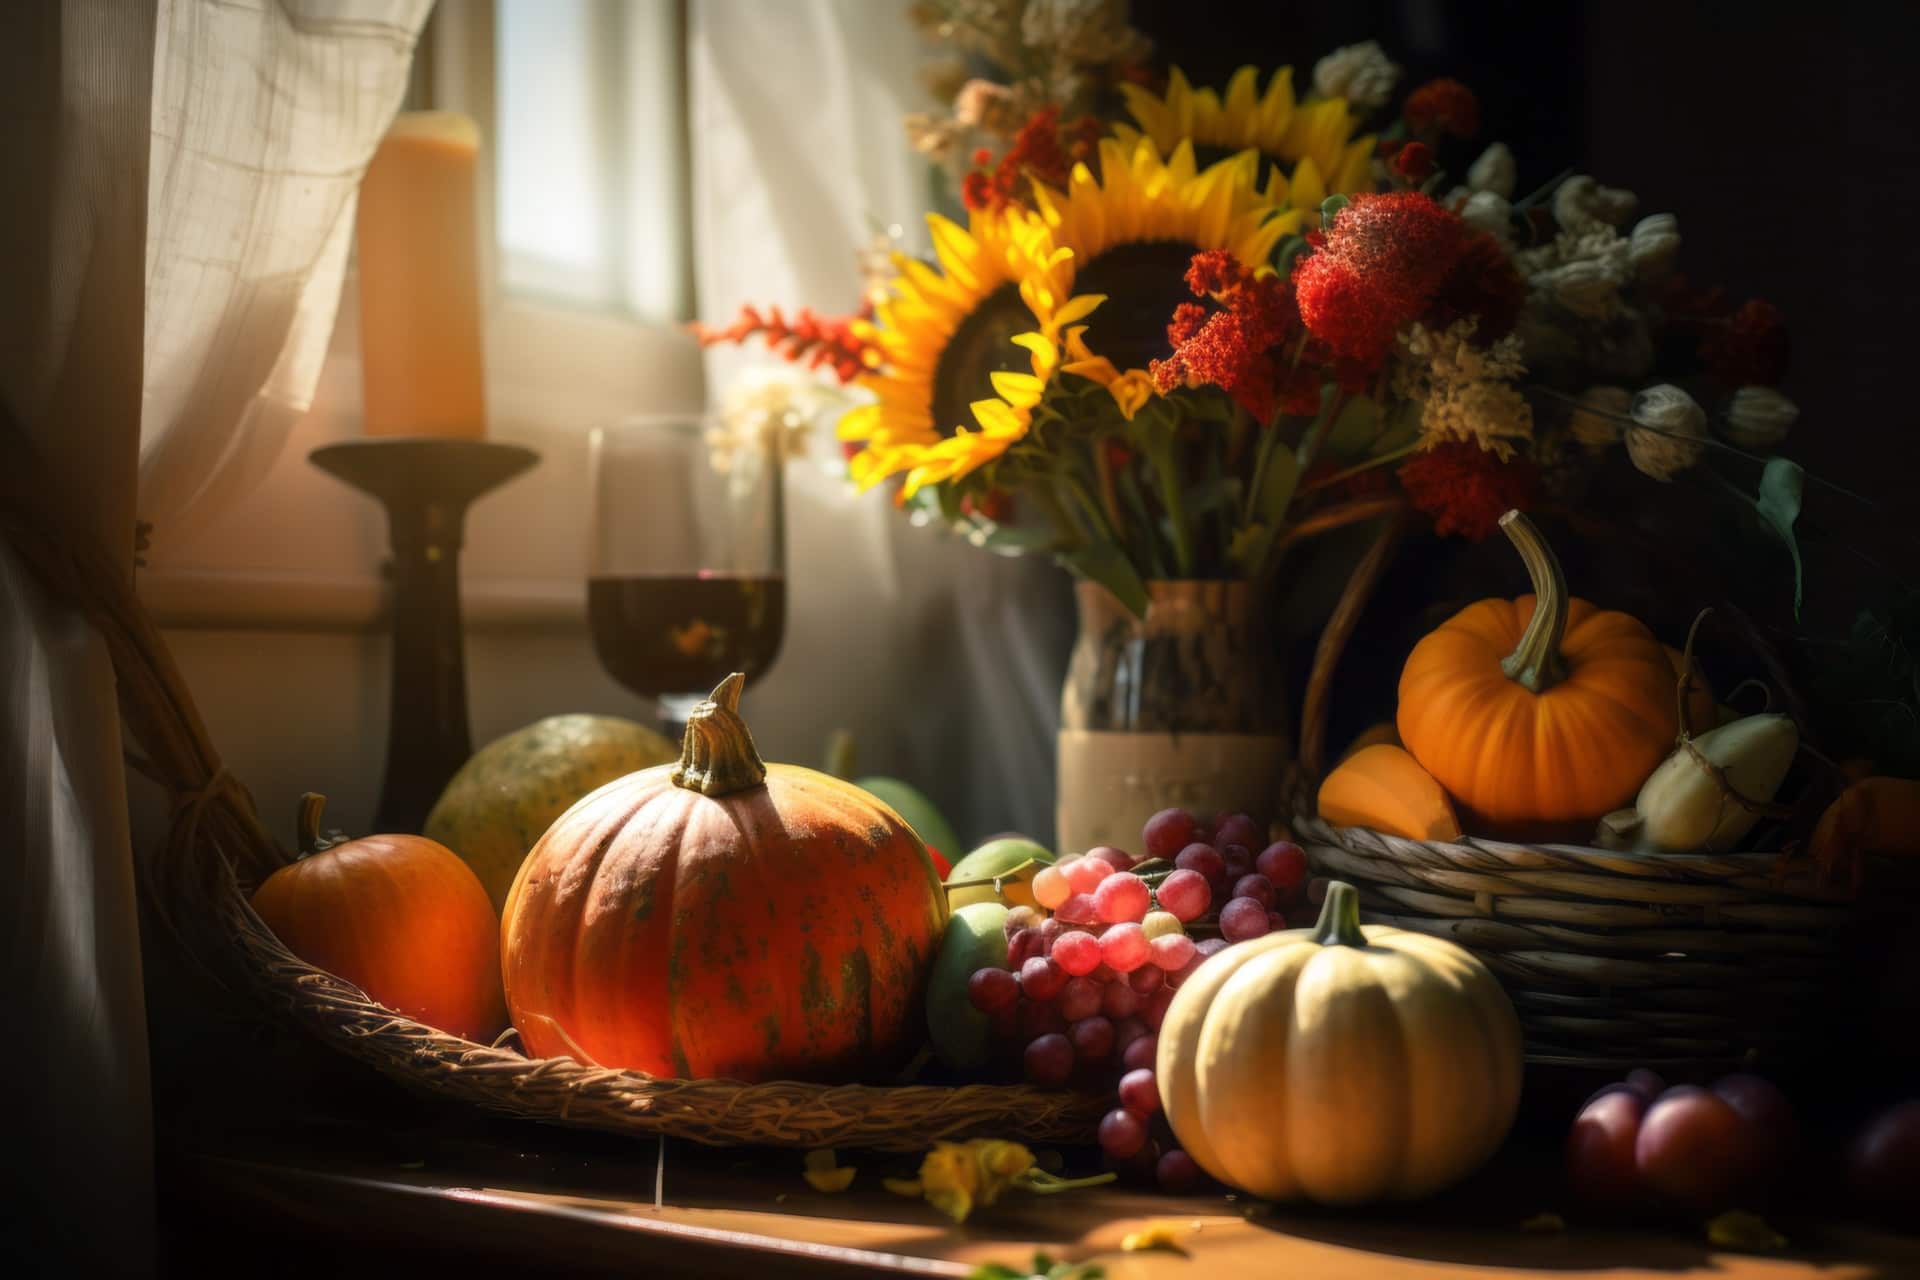 Featured image for “Thanksgiving: An Expression of Faith”